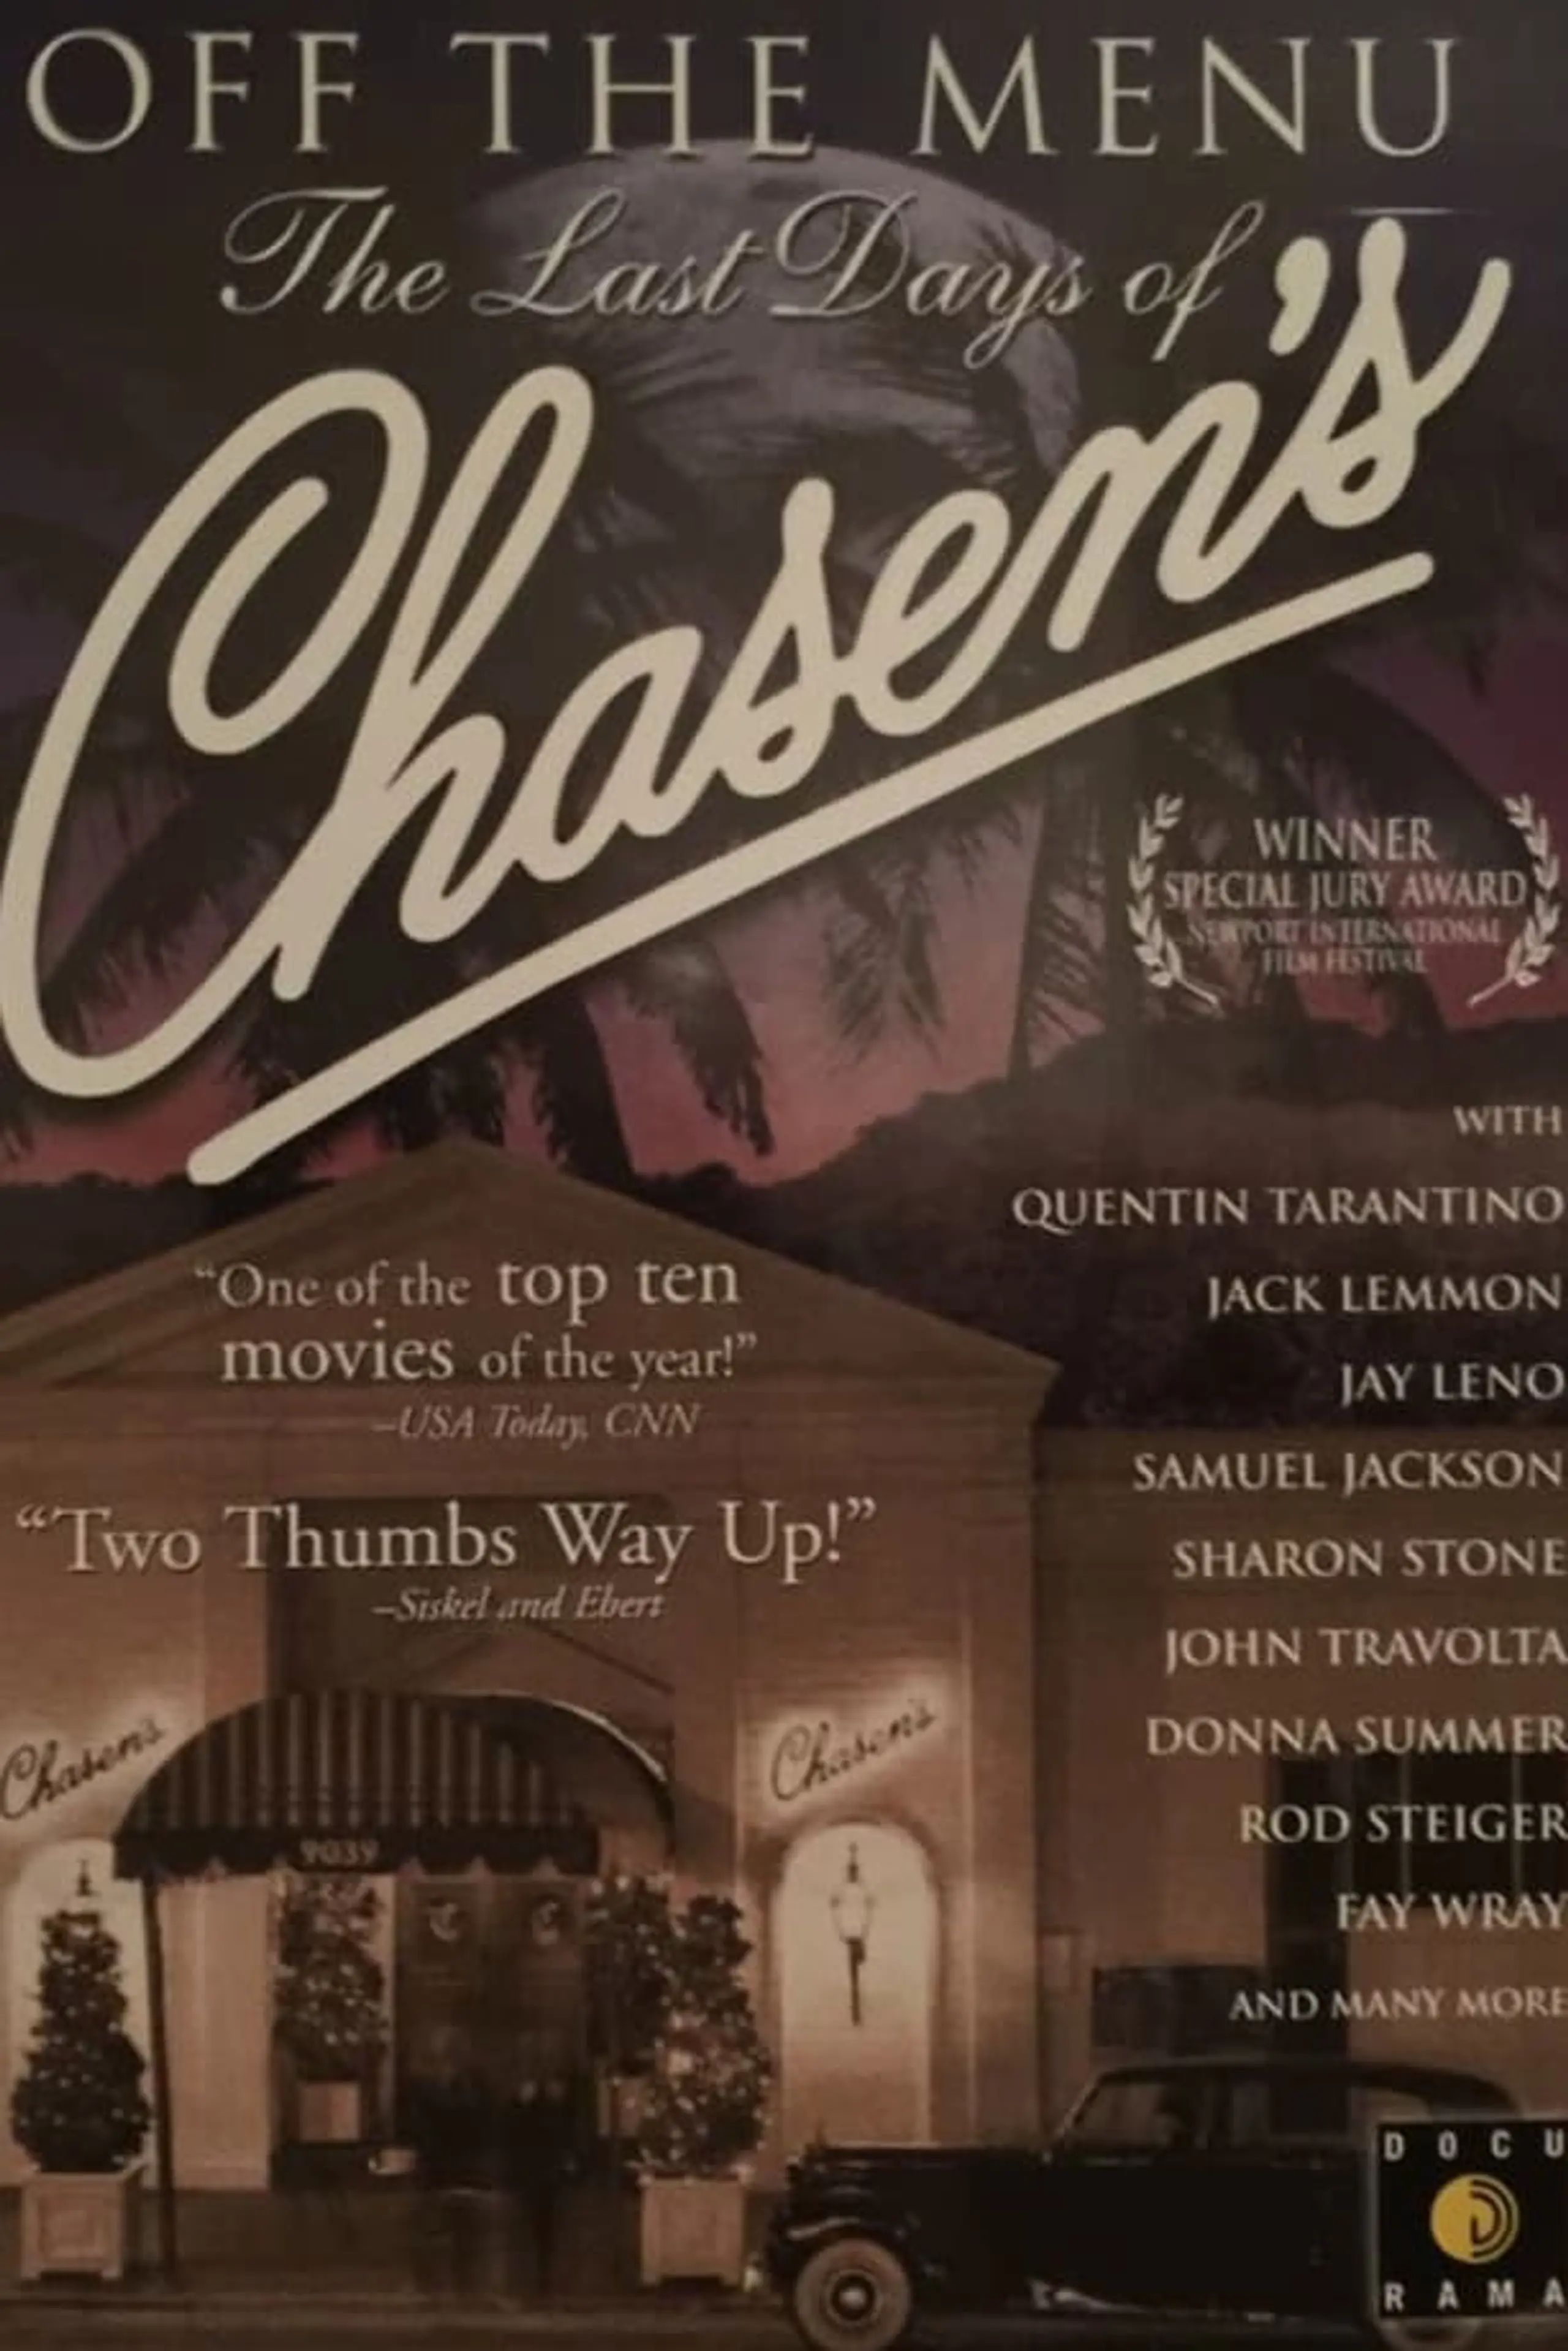 Off the Menu: The Last Days of Chasen's